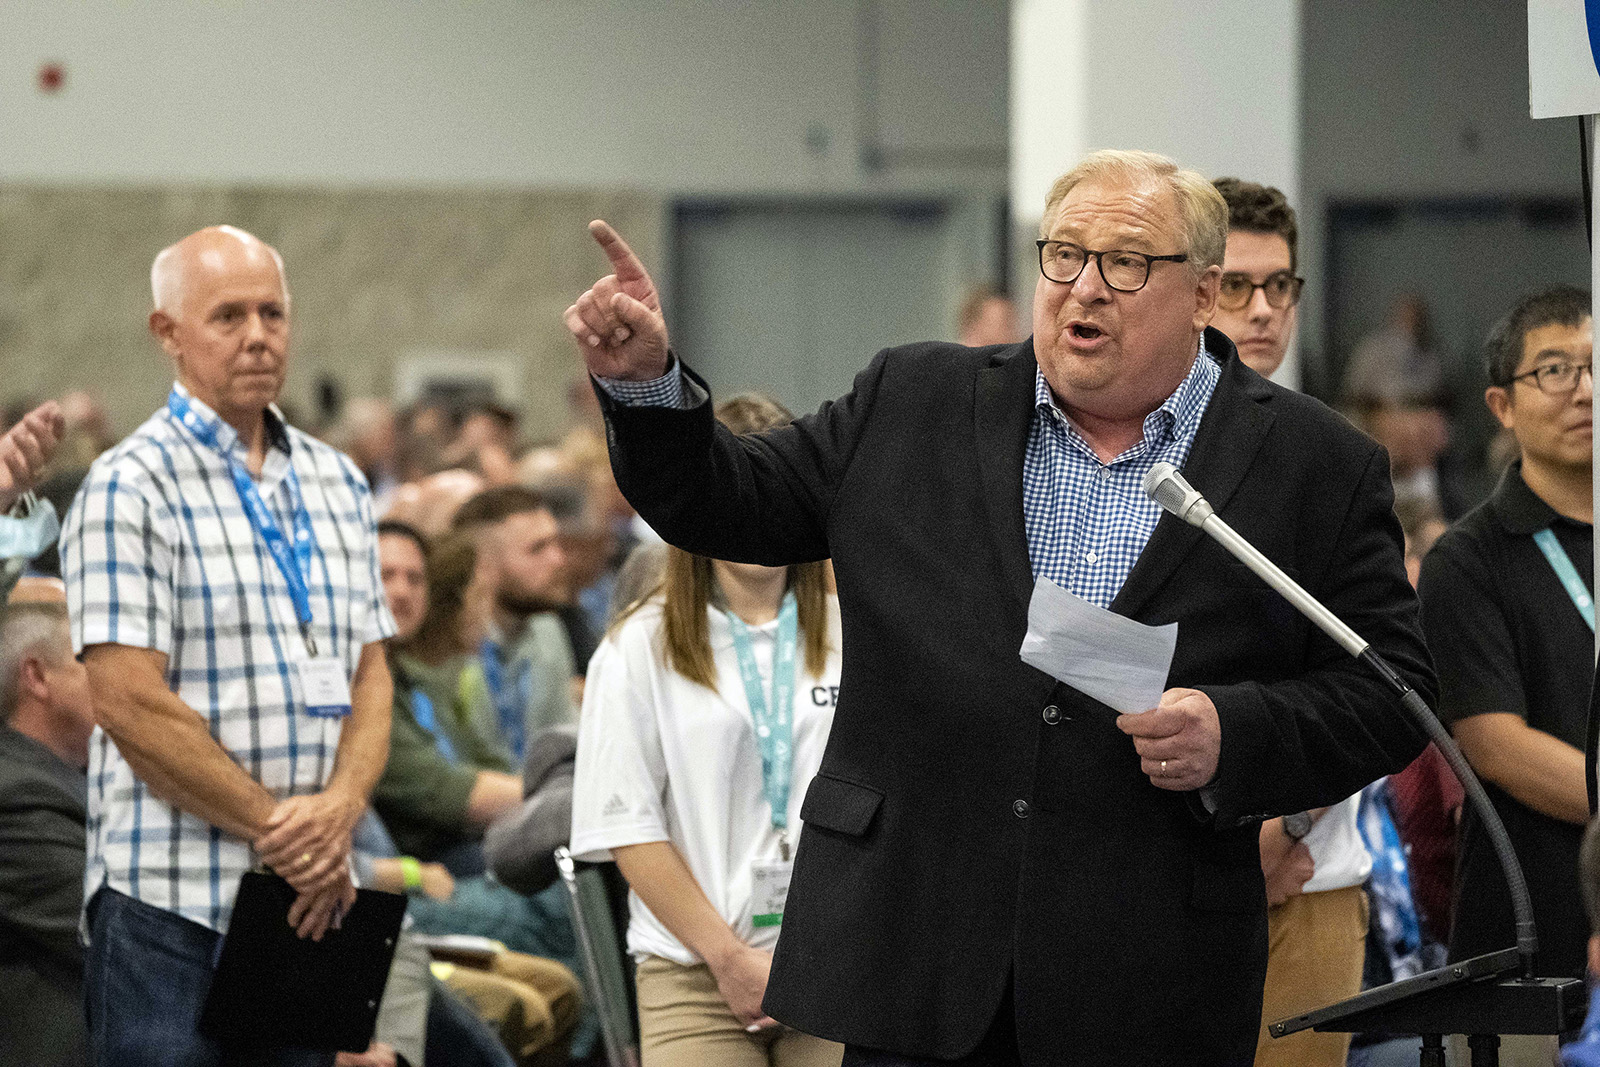 Rick Warren, pastor of Saddleback Church, addresses the Southern Baptist Convention annual meeting on Tuesday, June 14, 2022, in Anaheim, California. Photo by Justin L. Stewart/Religion News Service